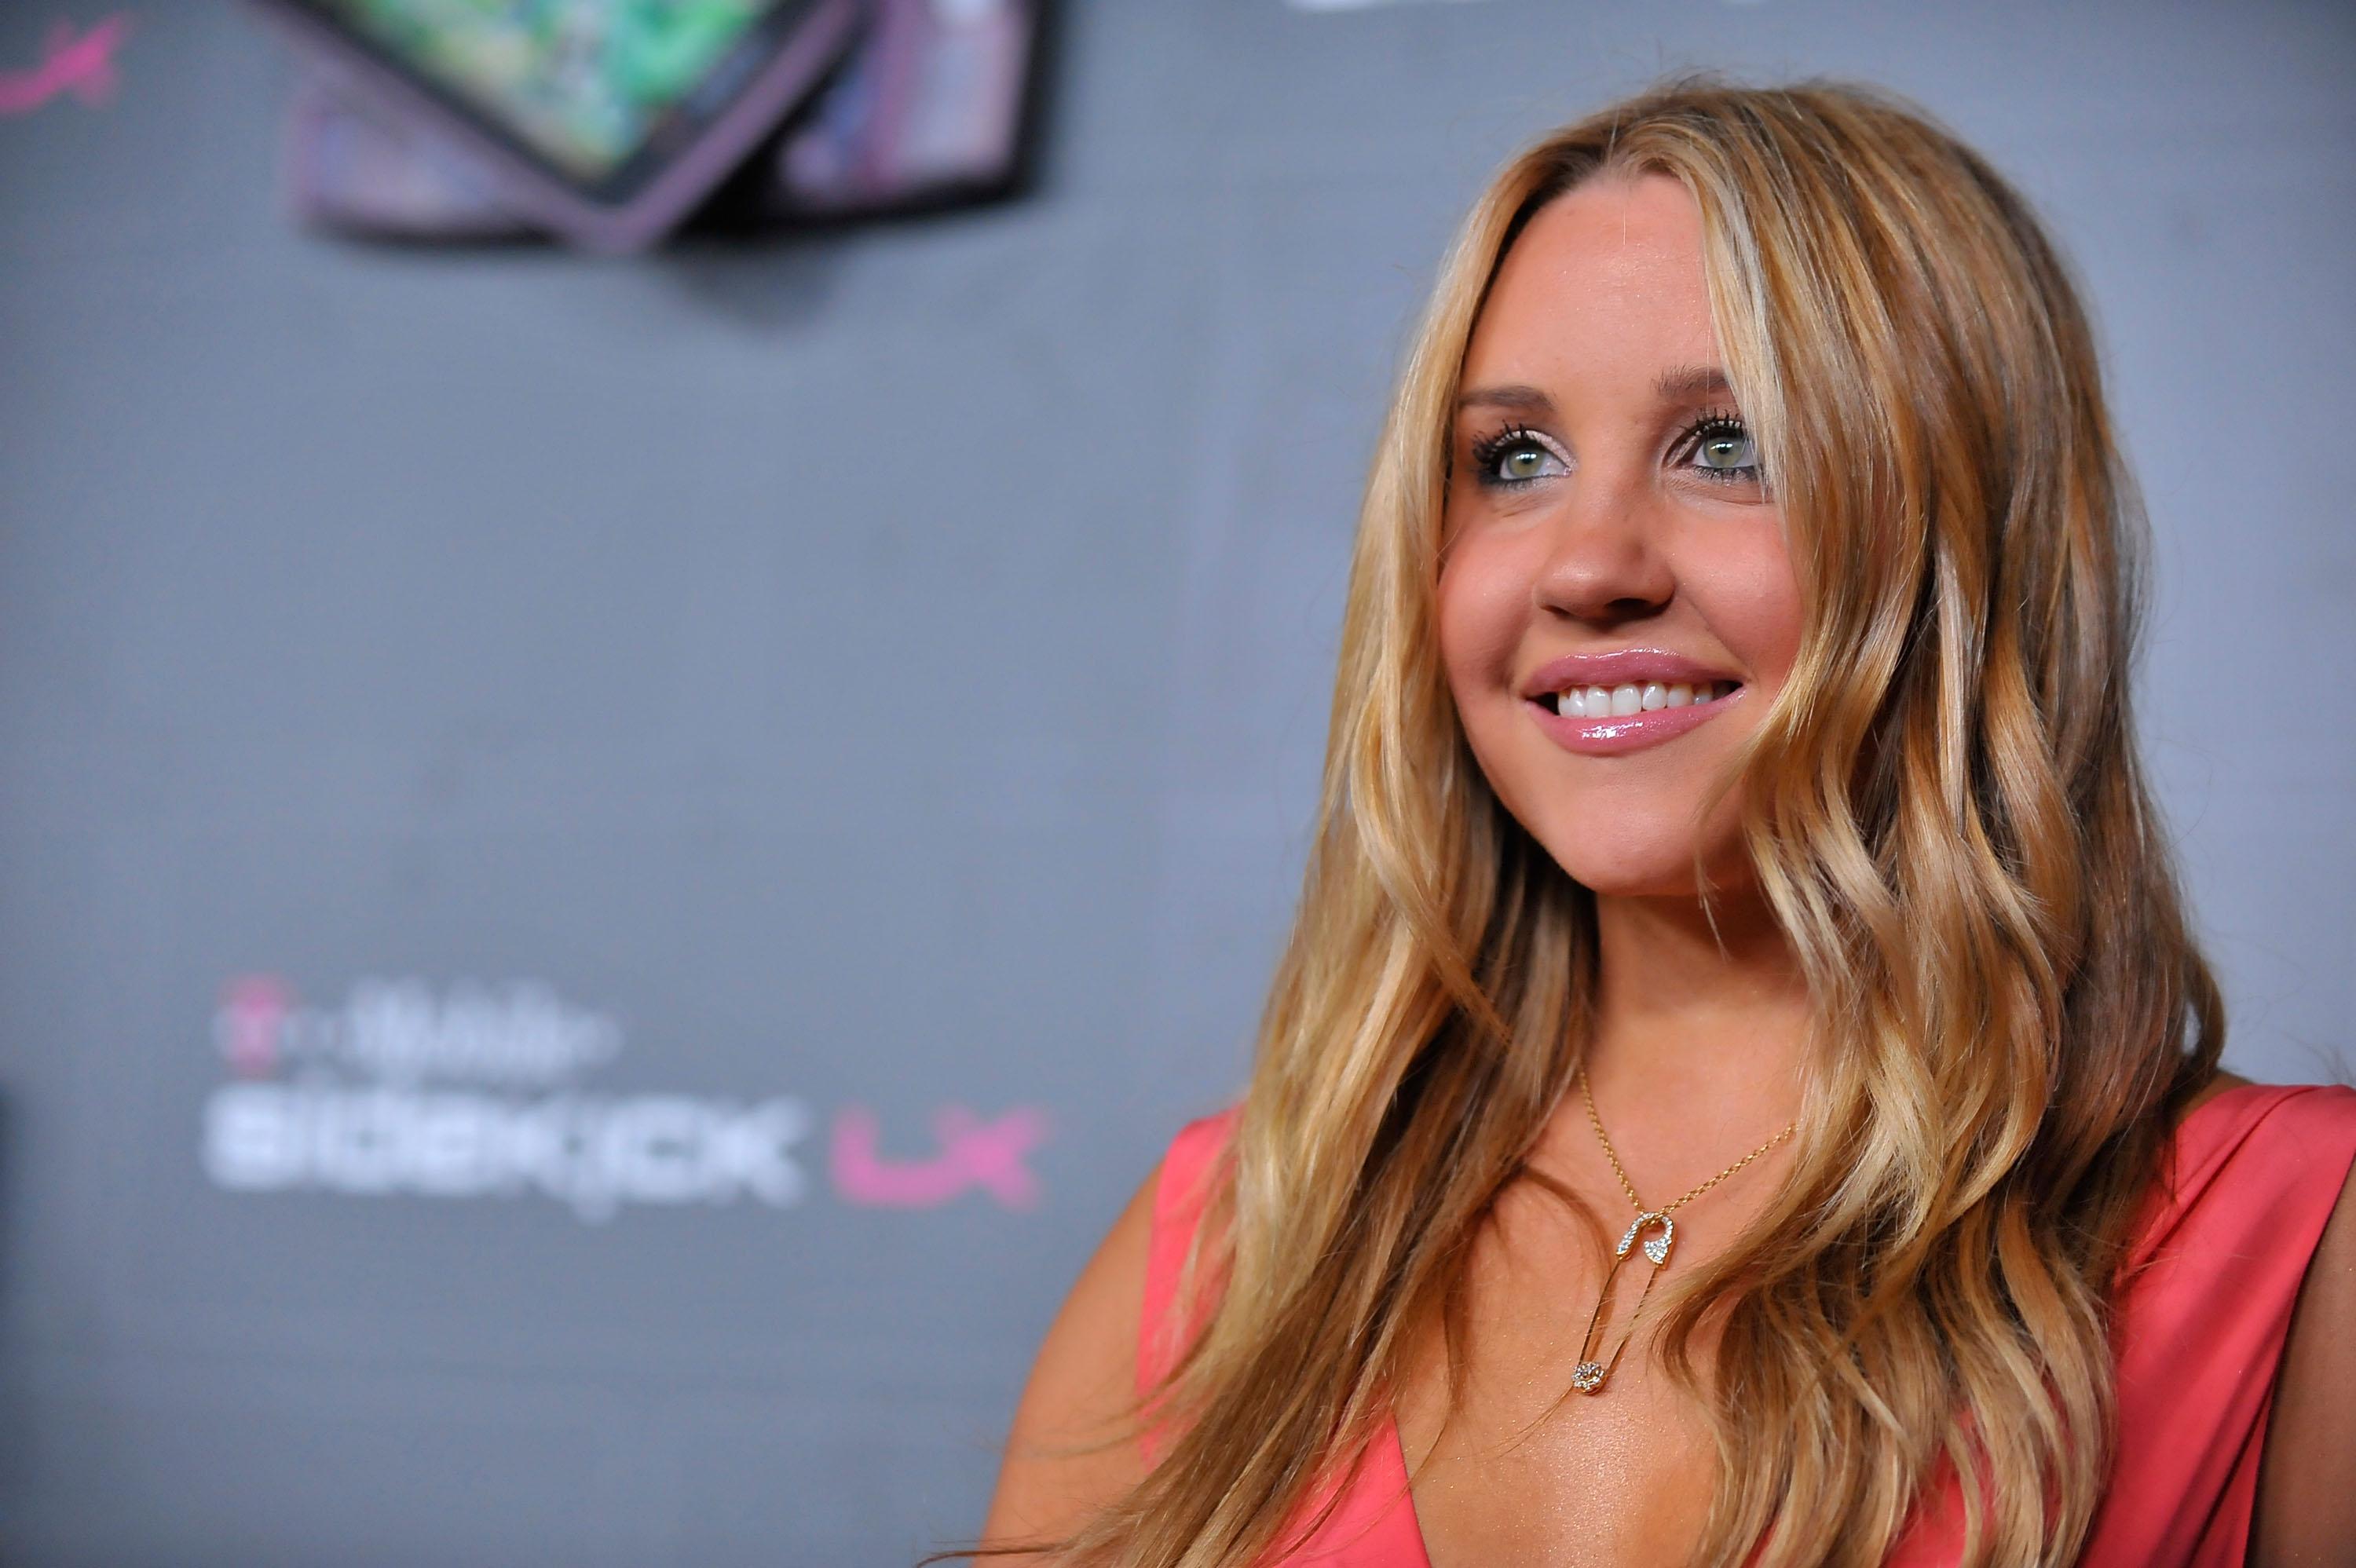 Amanda Bynes Addresses Mother’s Conservatorship ‘Issue’ with Instagram Post